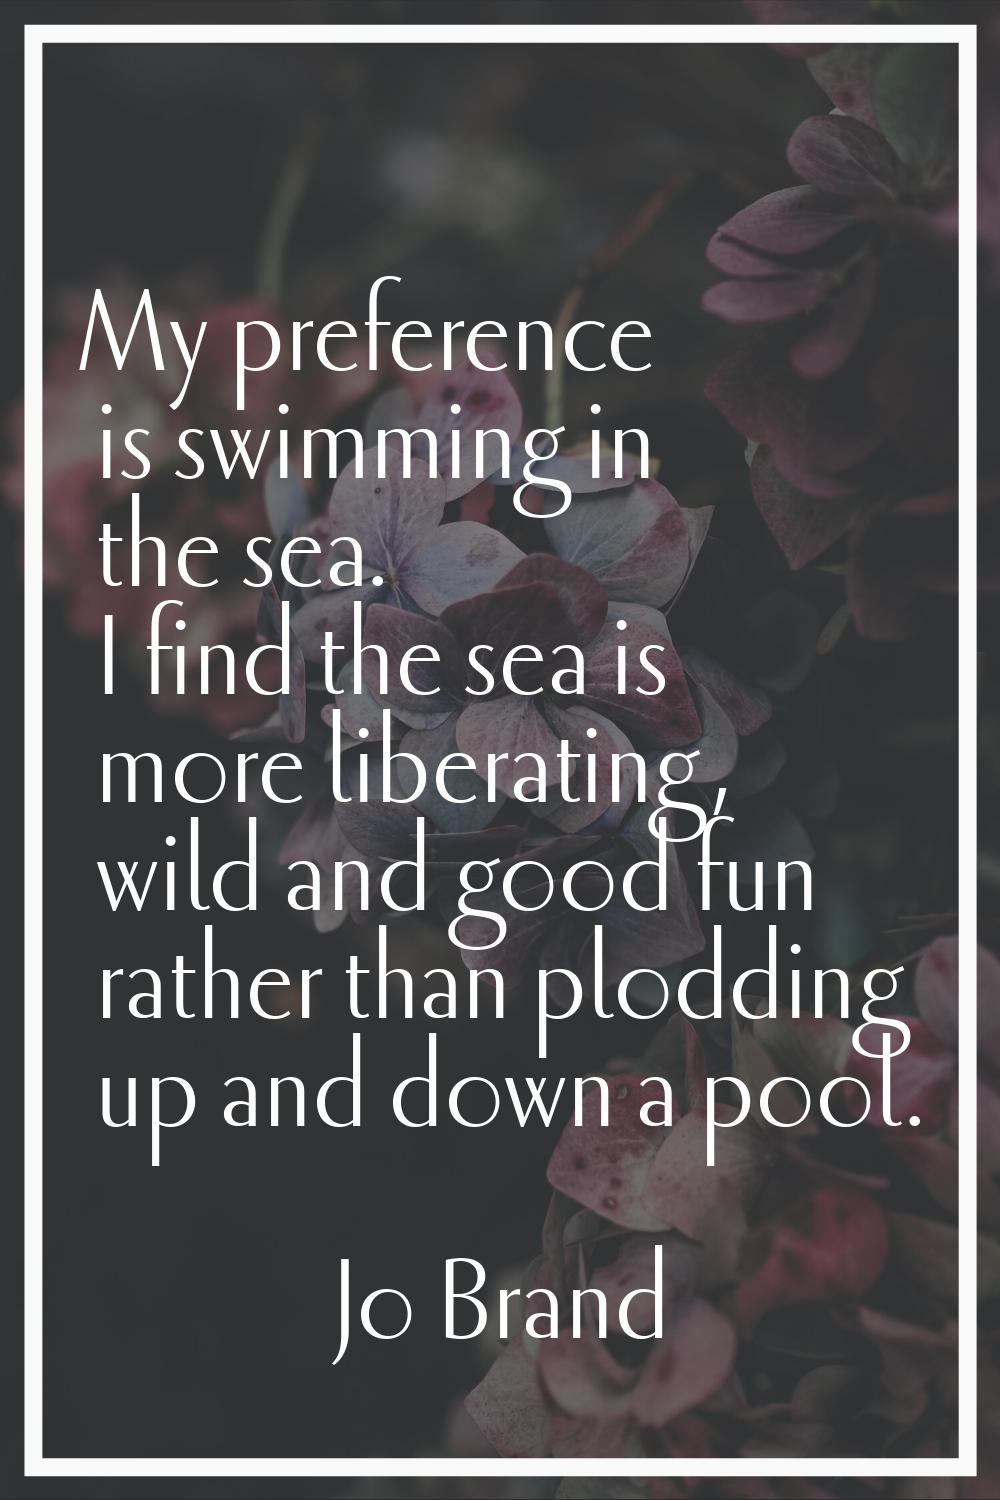 My preference is swimming in the sea. I find the sea is more liberating, wild and good fun rather t